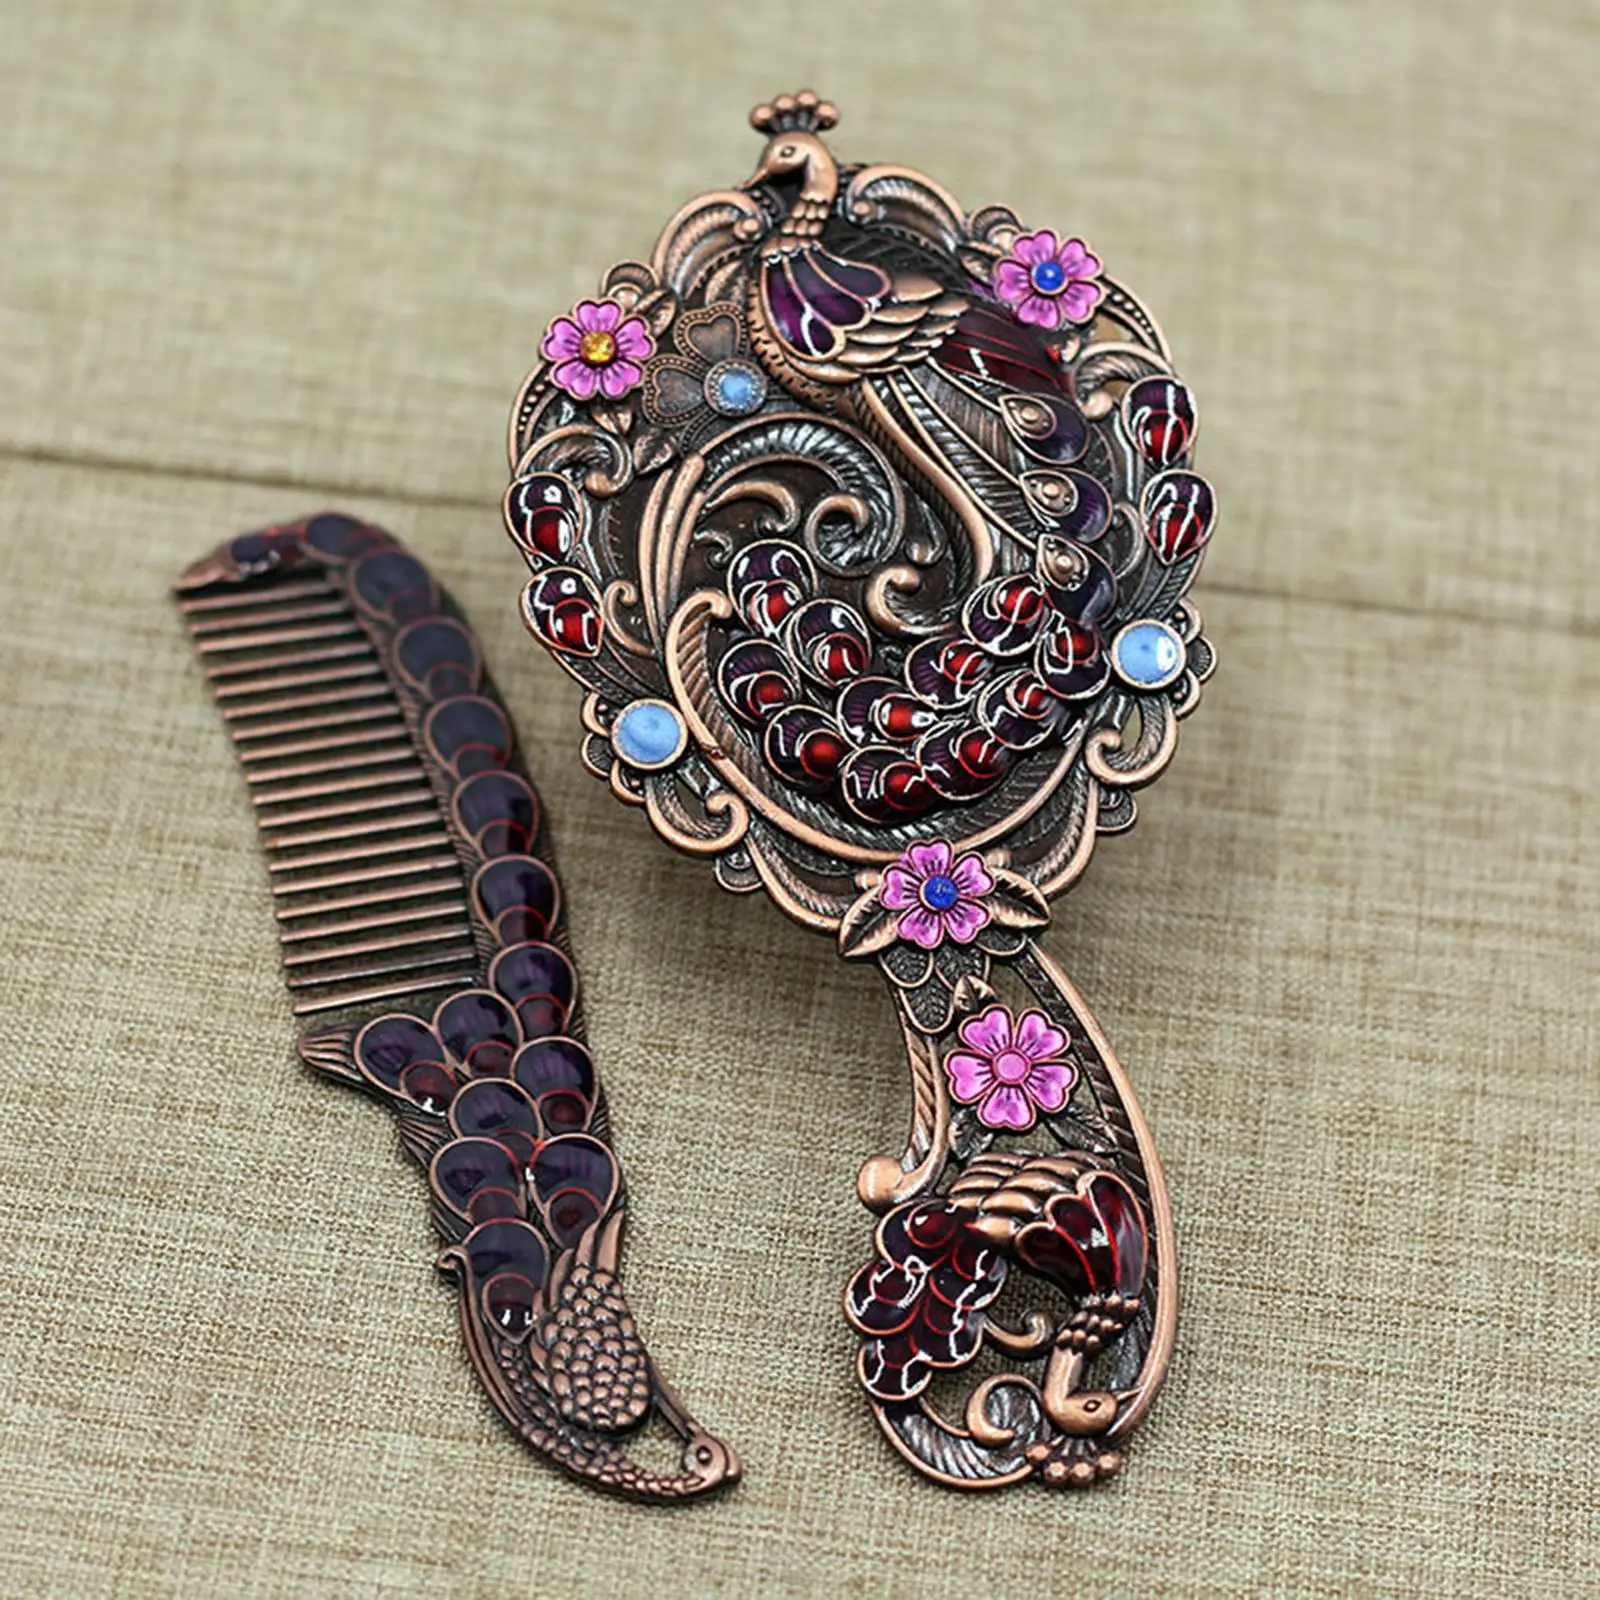 Embossing Oval Peacock Table Princess Mirror & Comb with Handle Decorative